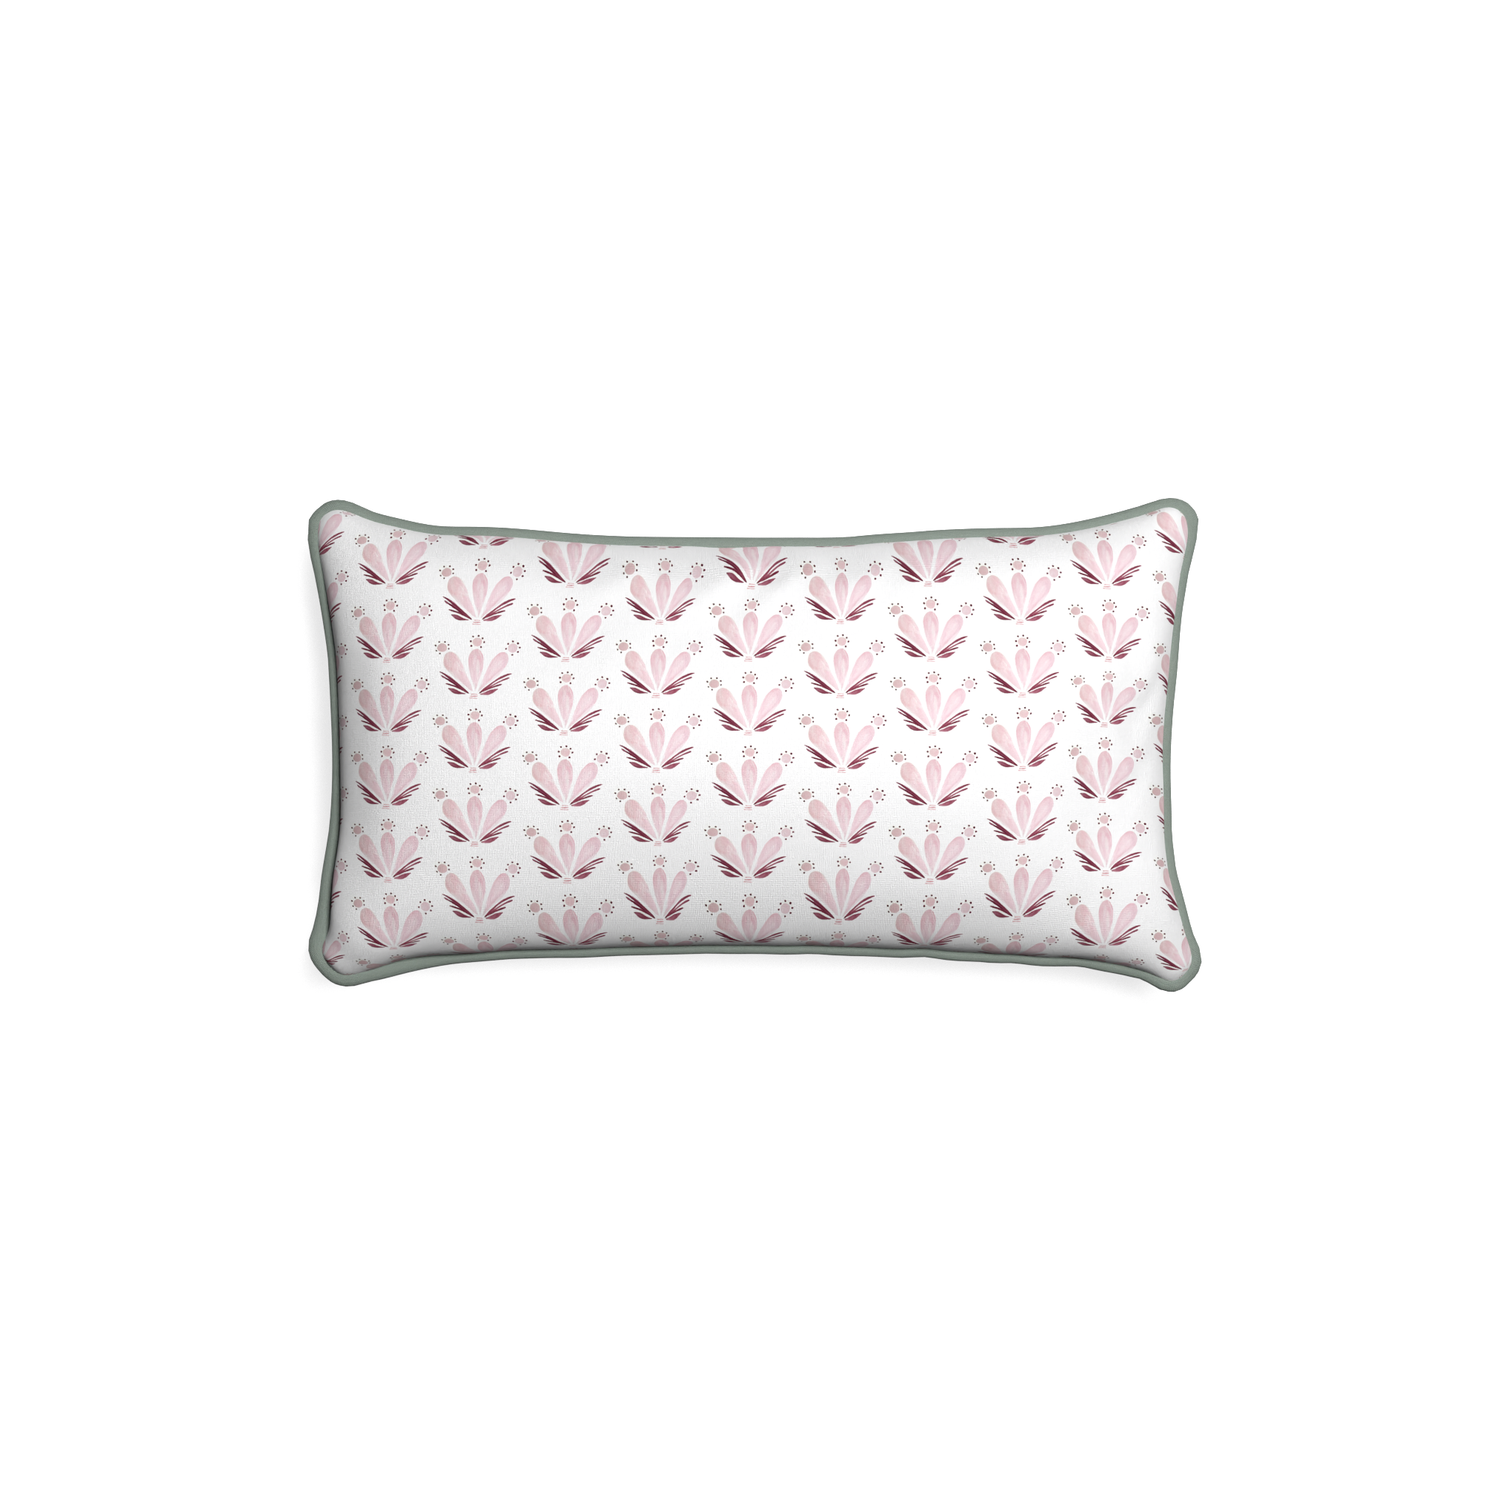 Petite-lumbar serena pink custom pink & burgundy drop repeat floralpillow with sage piping on white background